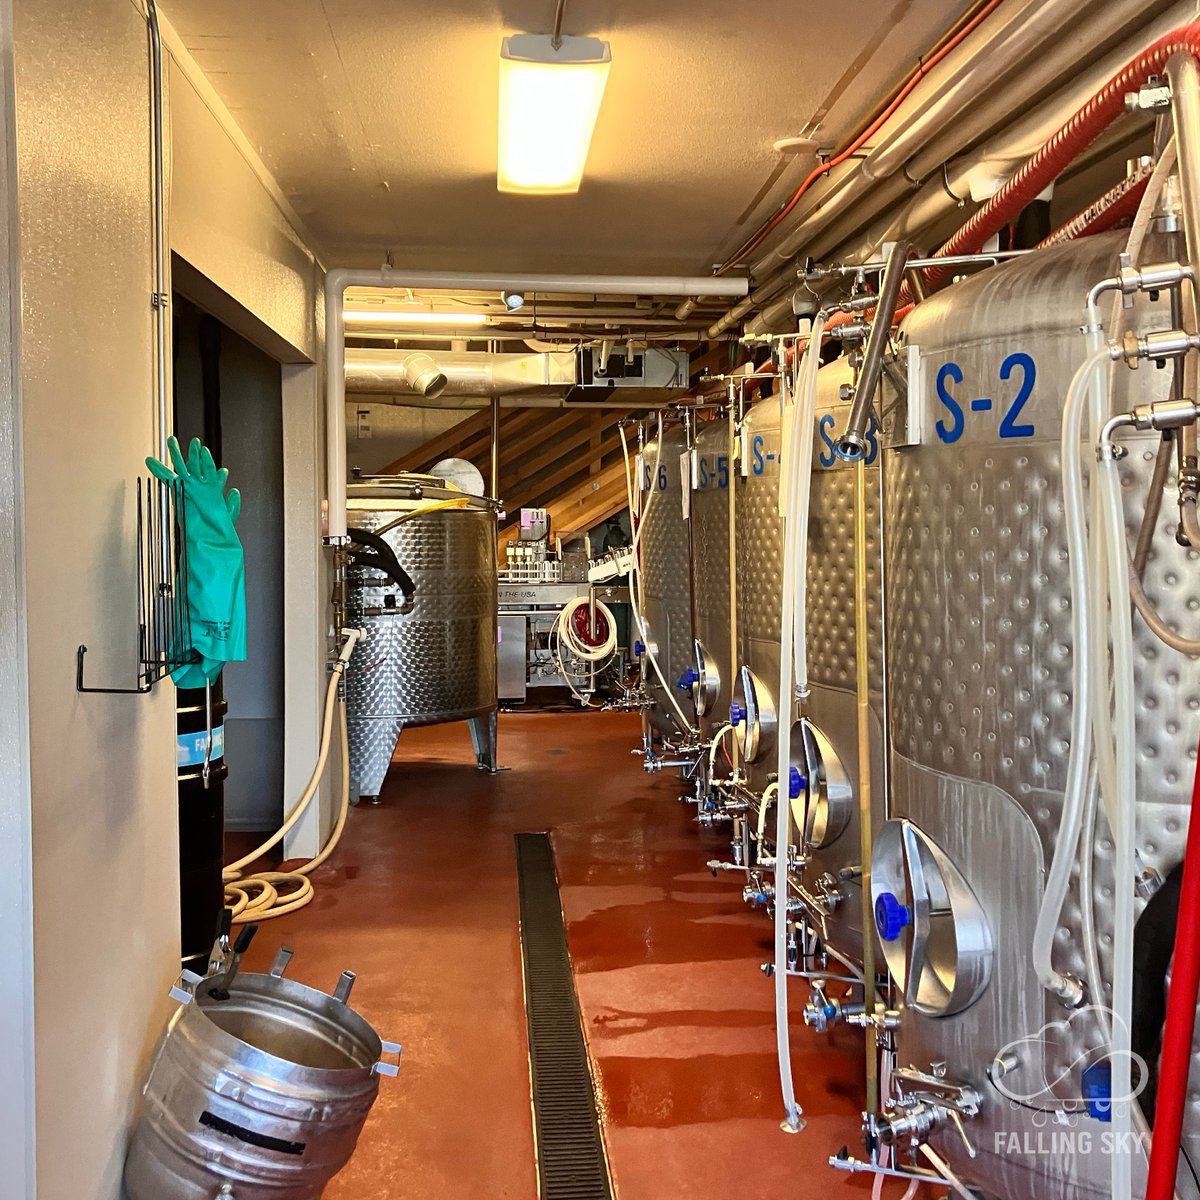 Now, this is where the magic happens. That sweet, delicious nectar sits in these tanks, just waiting to be drank (drunk? drinked?) by you!

_
#LetitPOUR #FallingSky #CraftBeer #EugeneOregon #Brewing